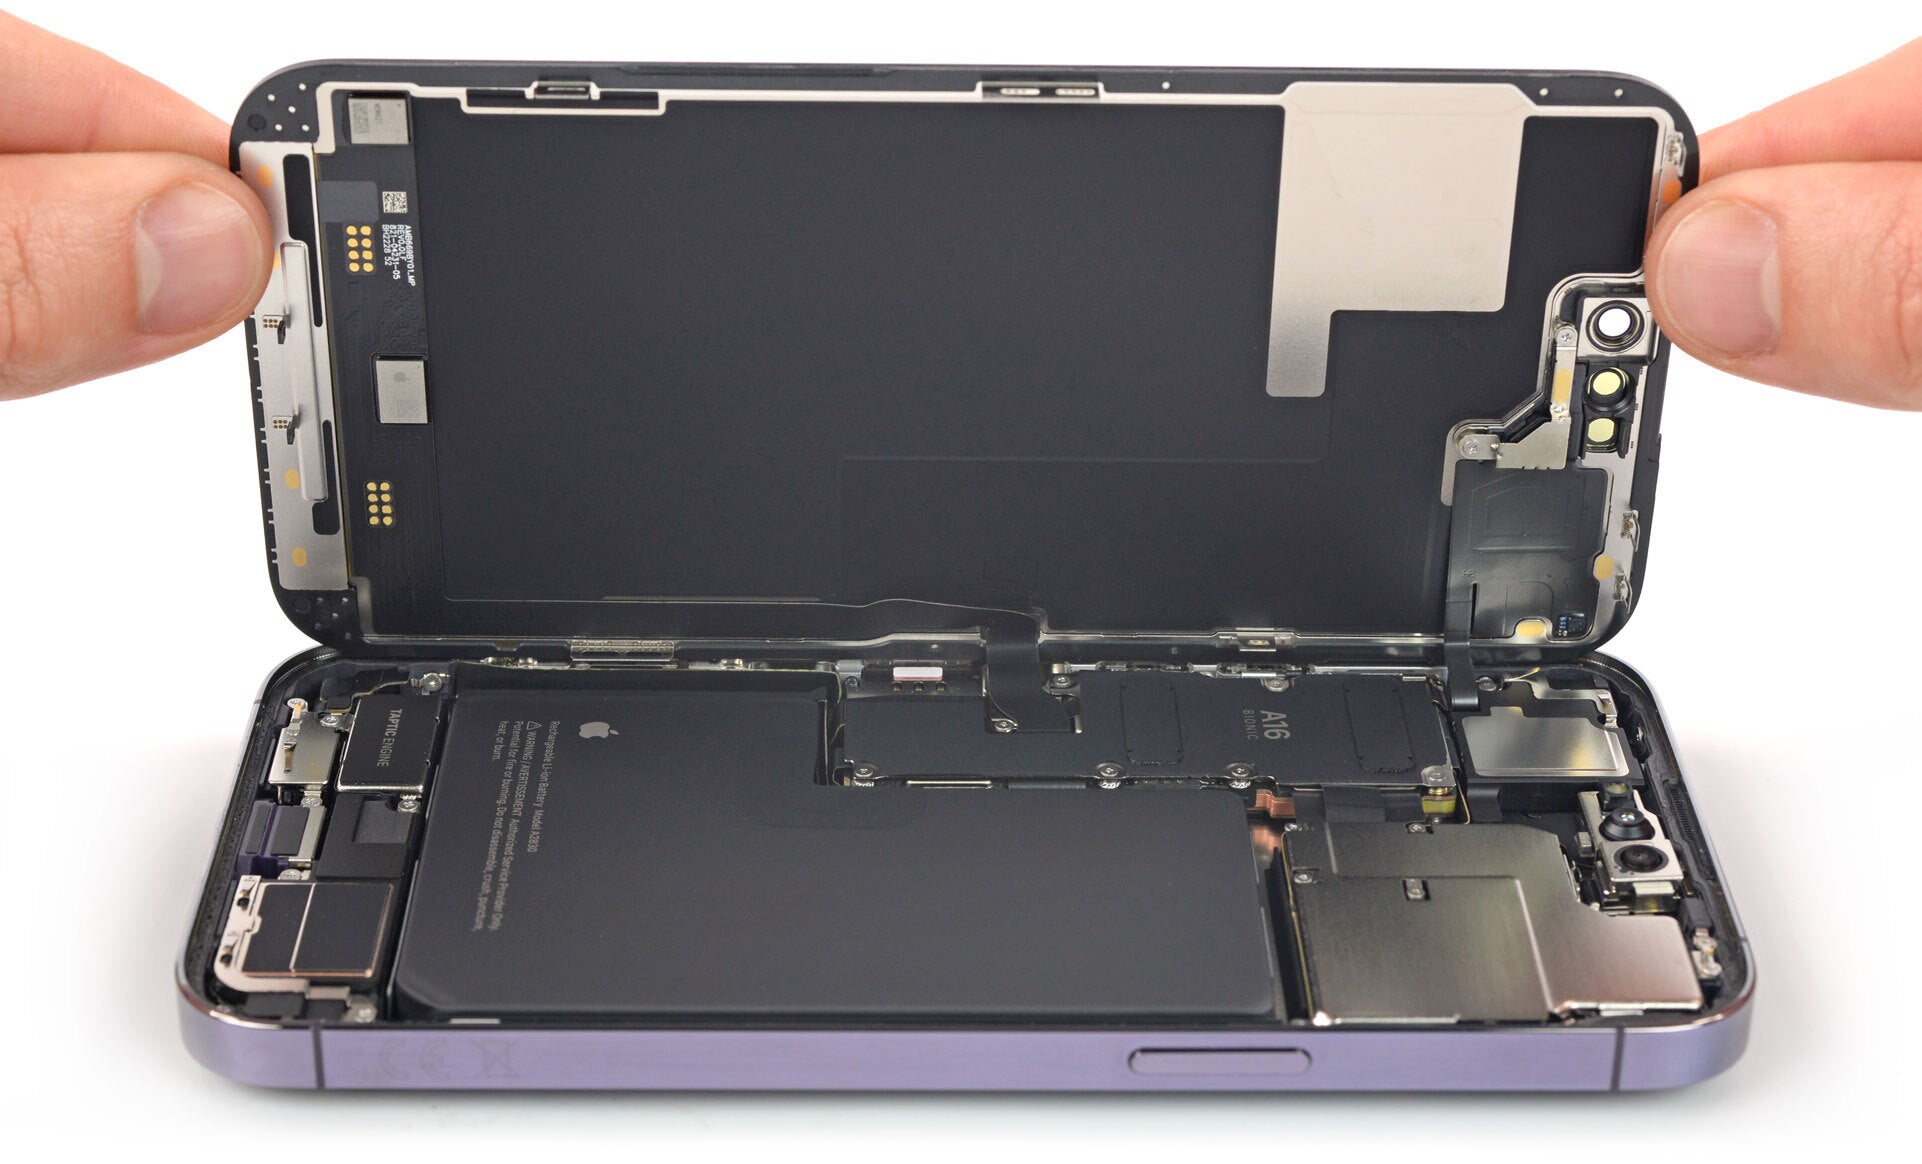 (Image Credit - iFixit) An inside view of the iPhone 14 Pro - iPhone 14 Pro Max teardown is bad news for those hoping for cheaper repairs